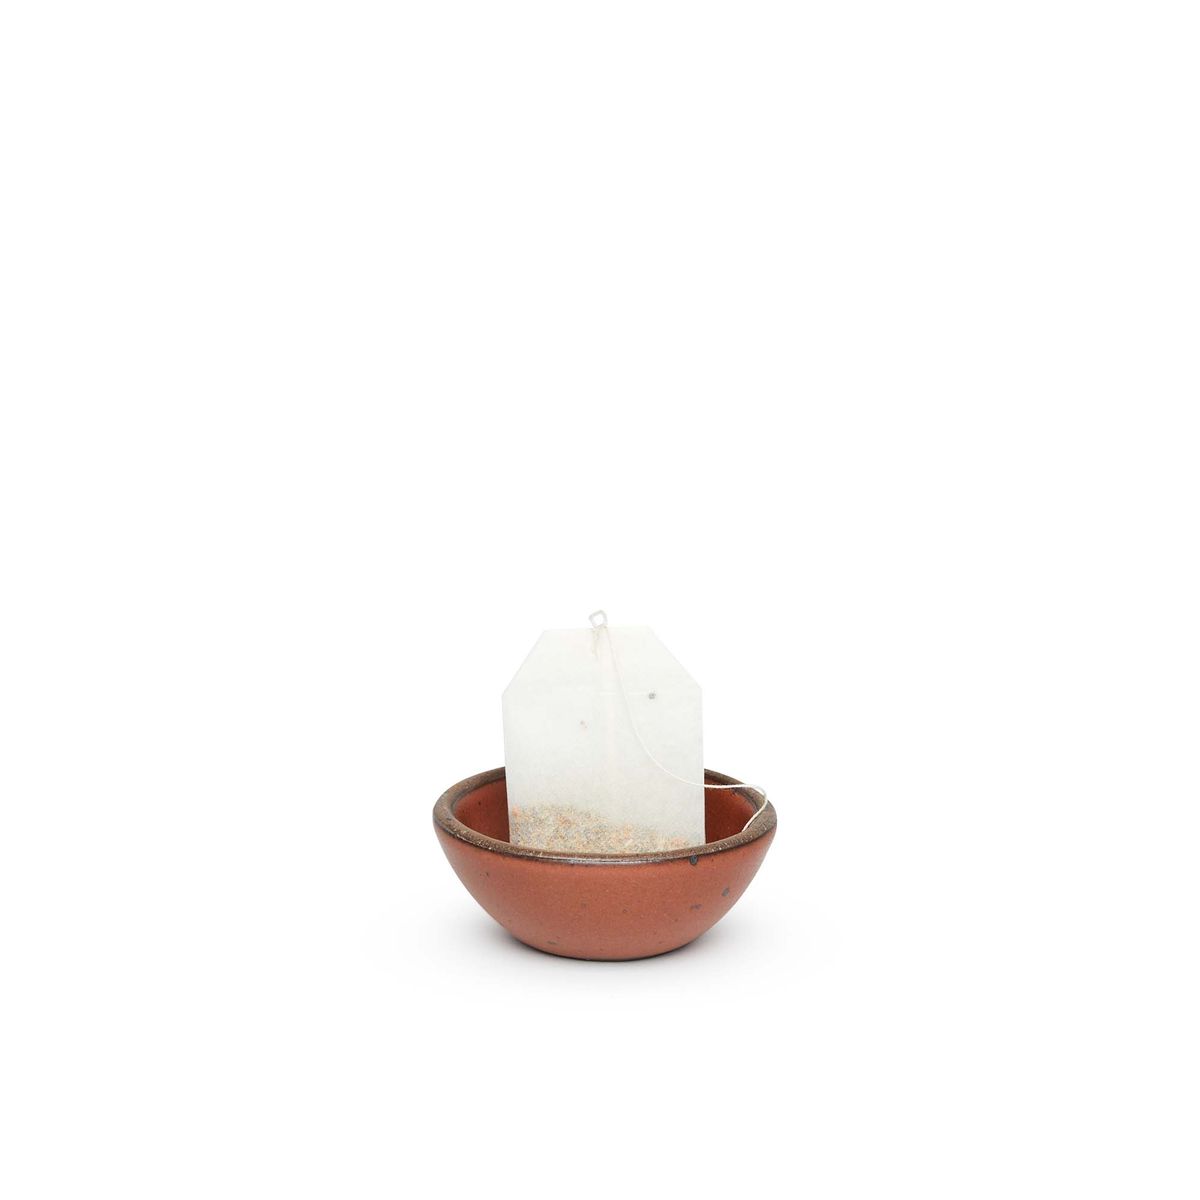 A tiny rounded ceramic bowl in a cool burnt terracotta color featuring iron speckles and an unglazed rim, holding a tea bag